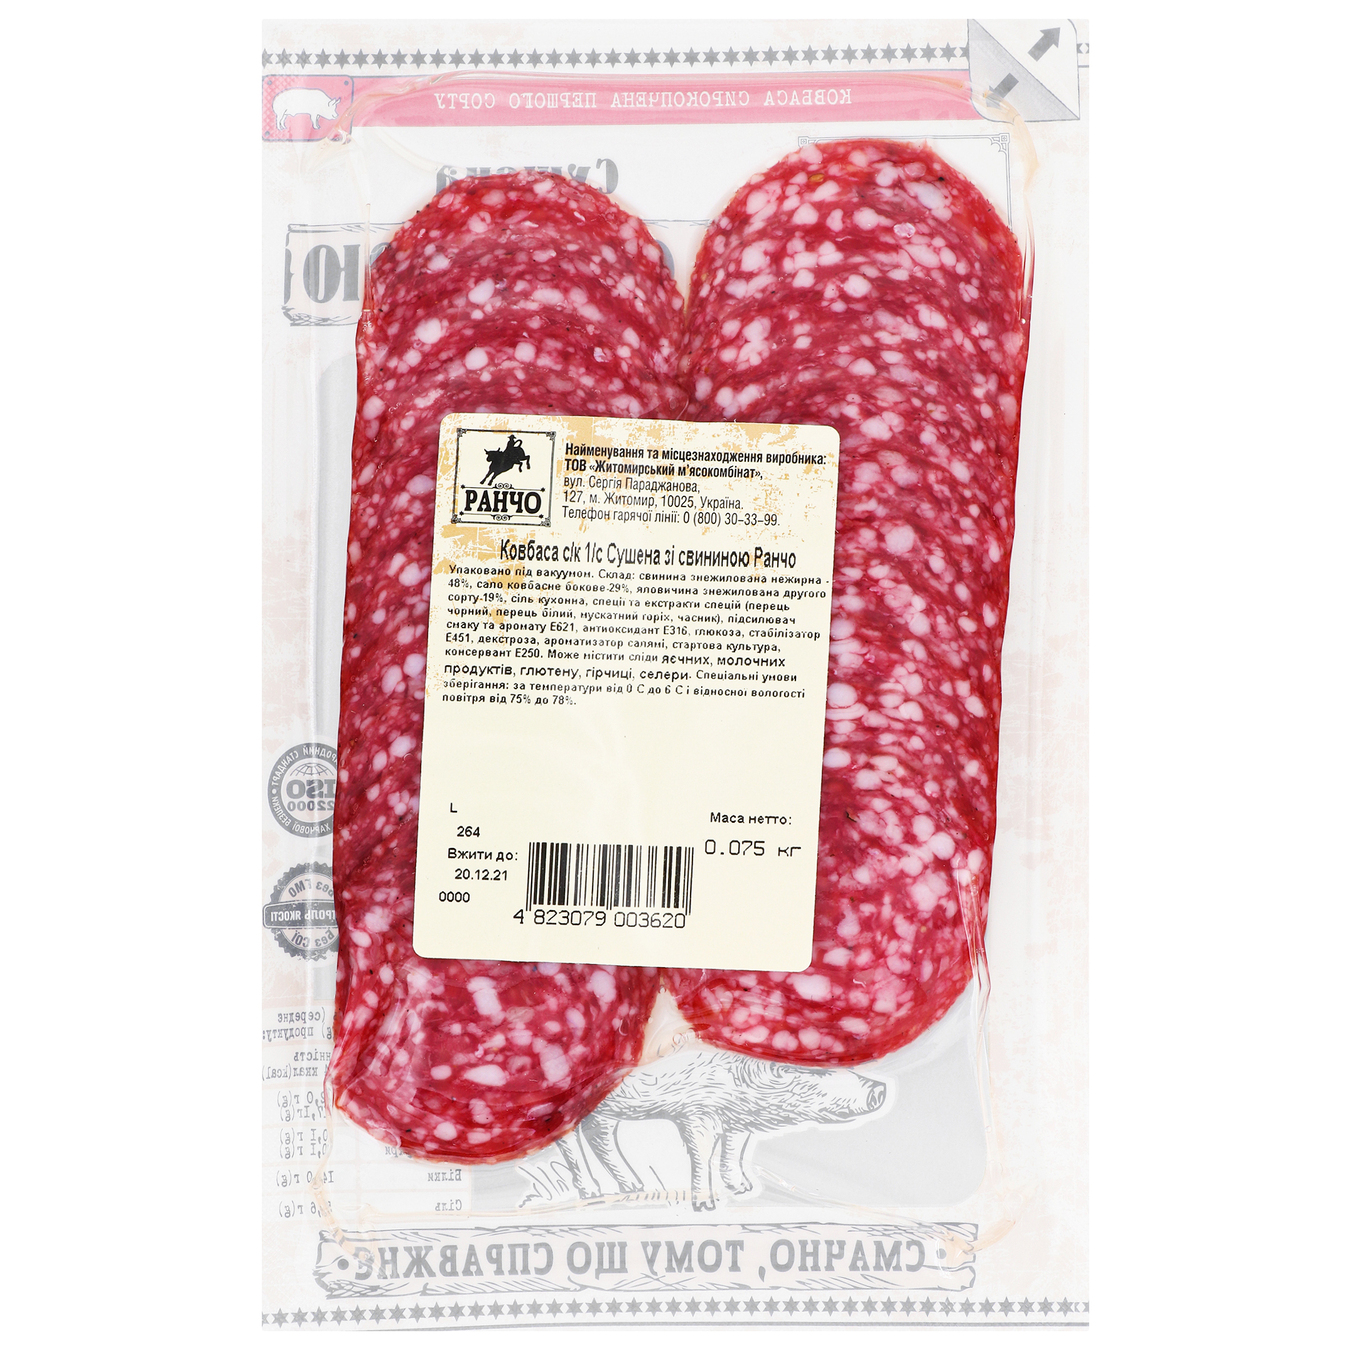 Rancho Sausage Dried with pork raw-smoked 0,075kg 2